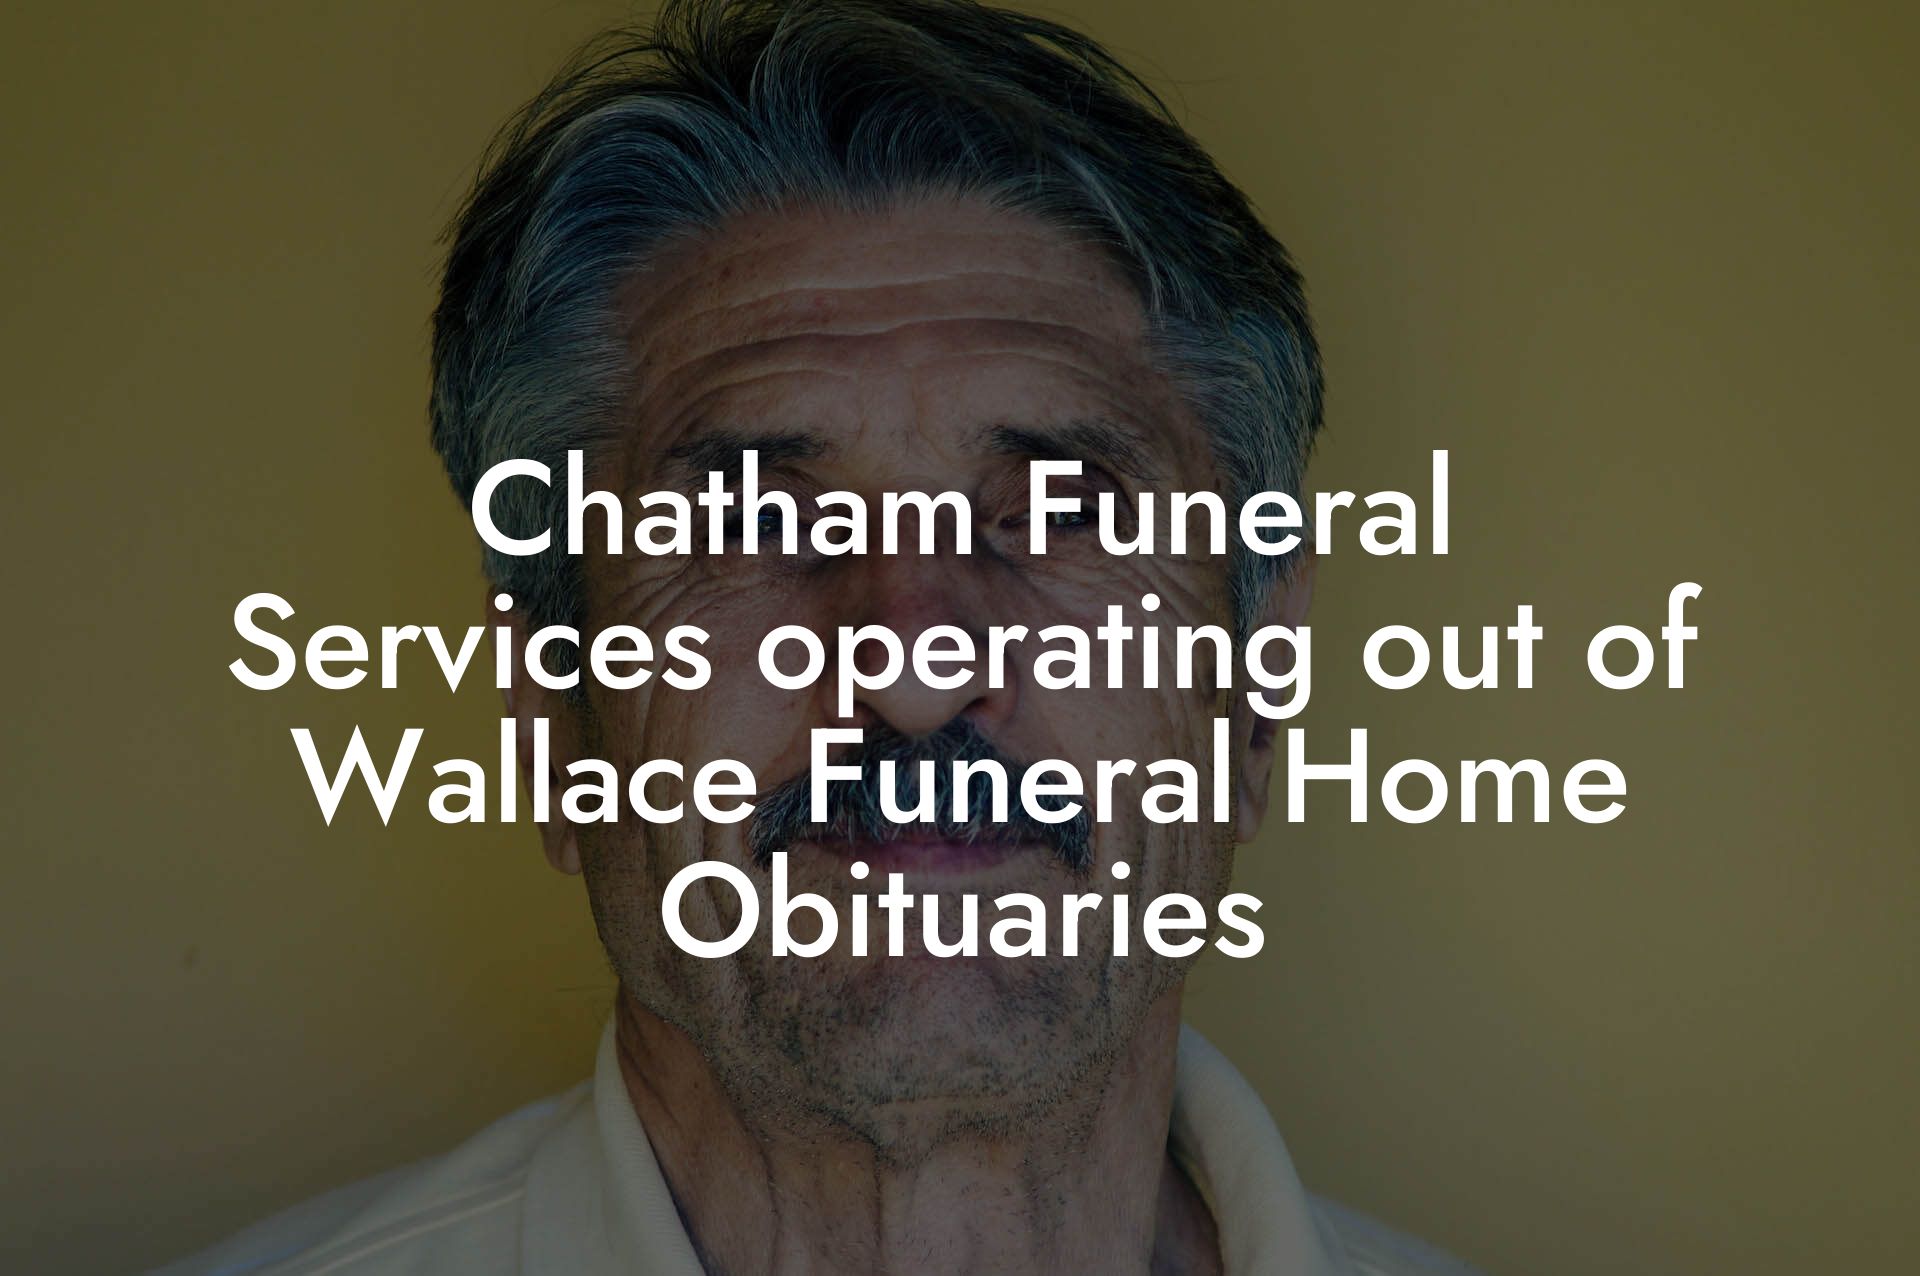 Chatham Funeral Services operating out of Wallace Funeral Home Obituaries